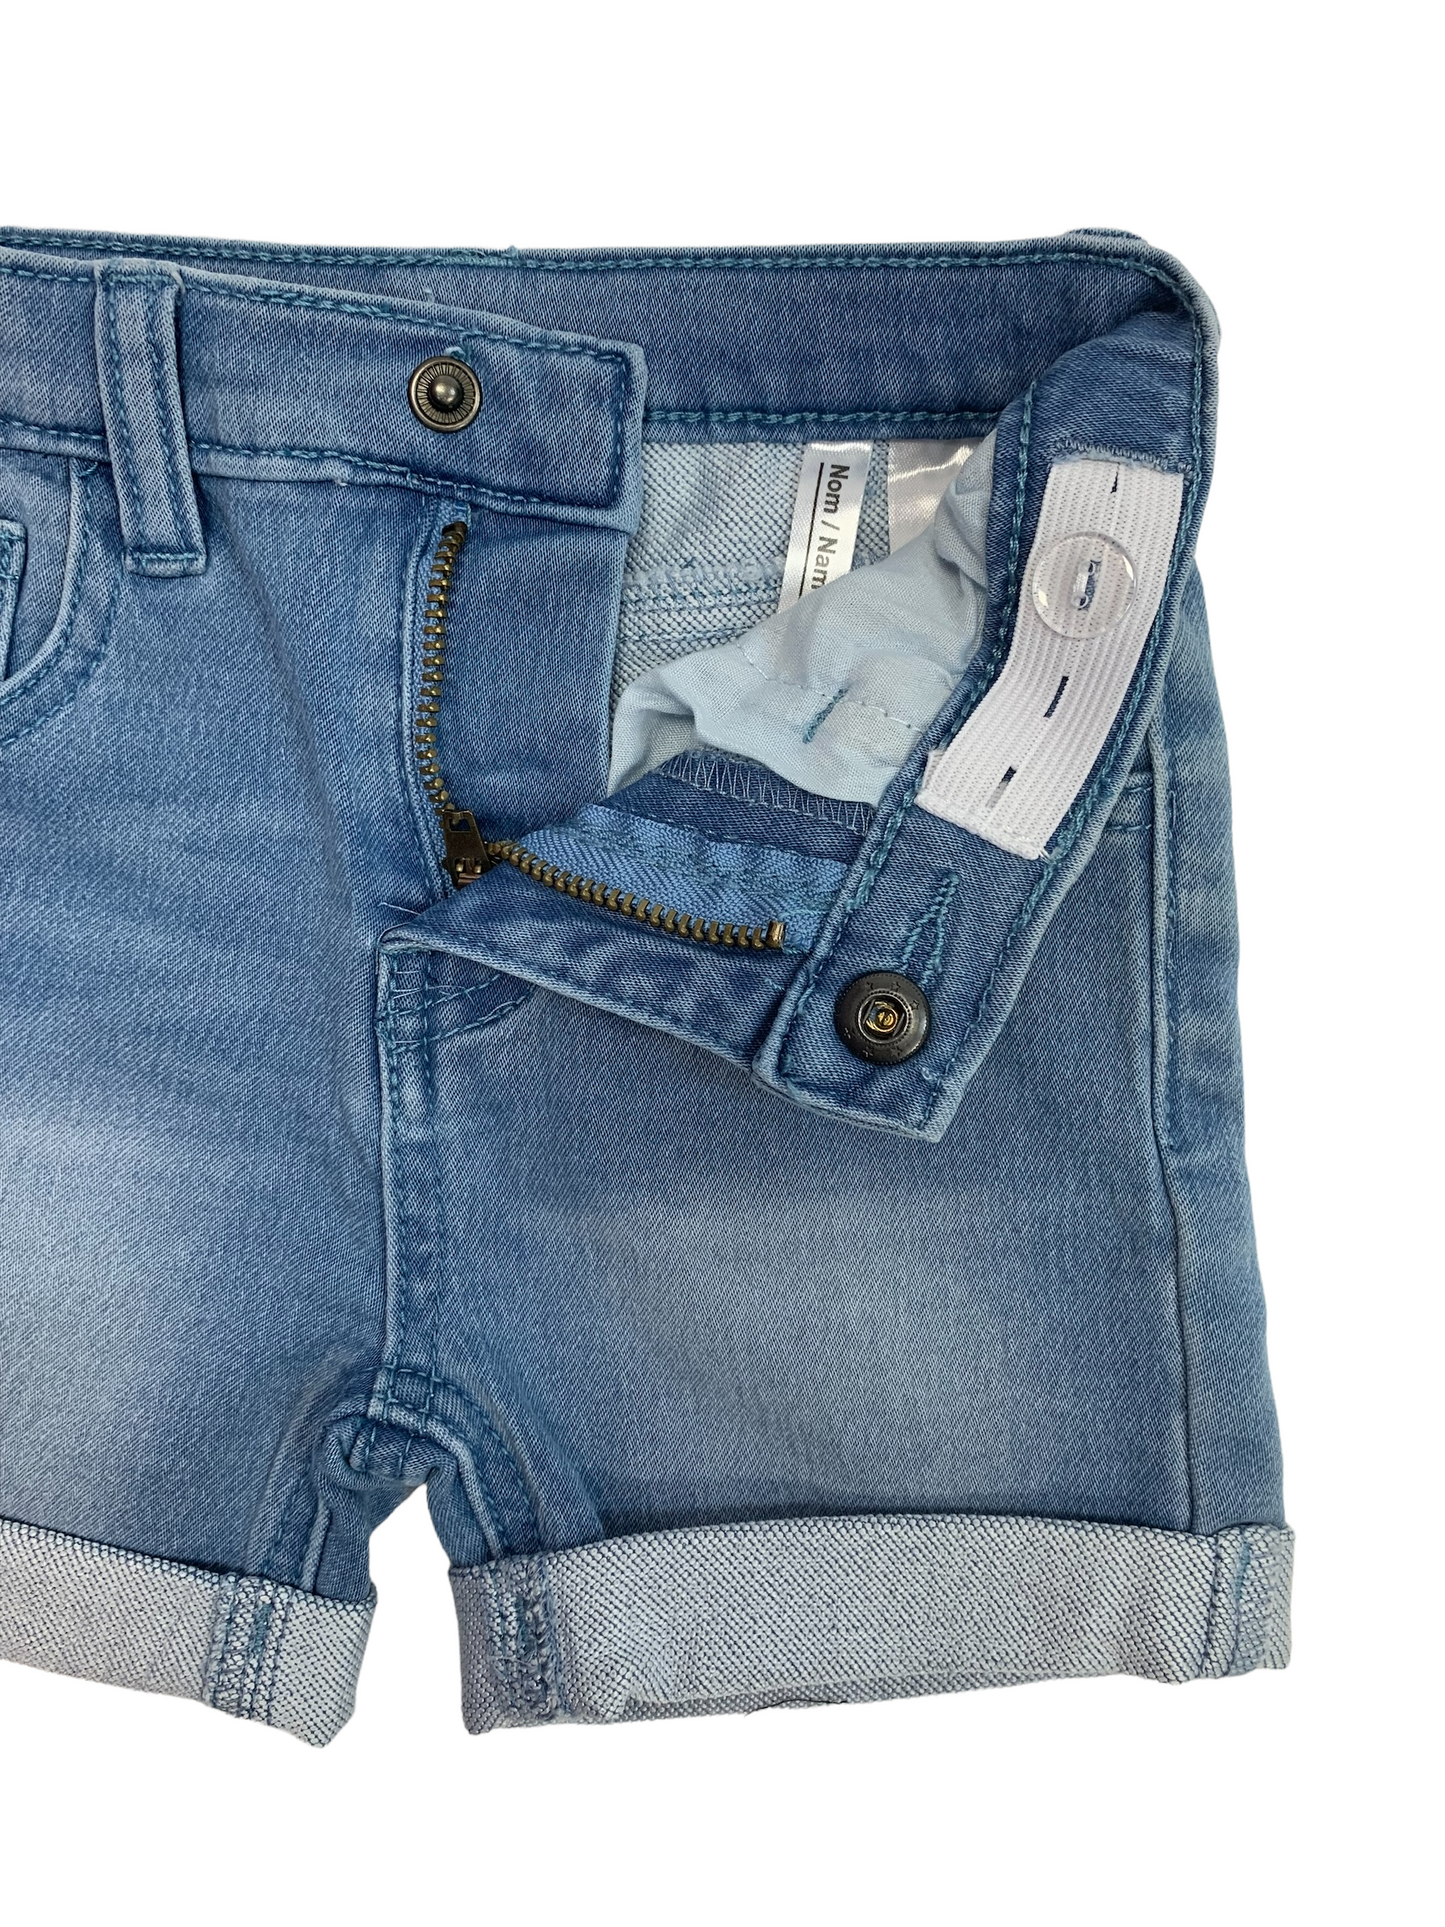 Blue denim shorts for baby boy 6 to 24 months